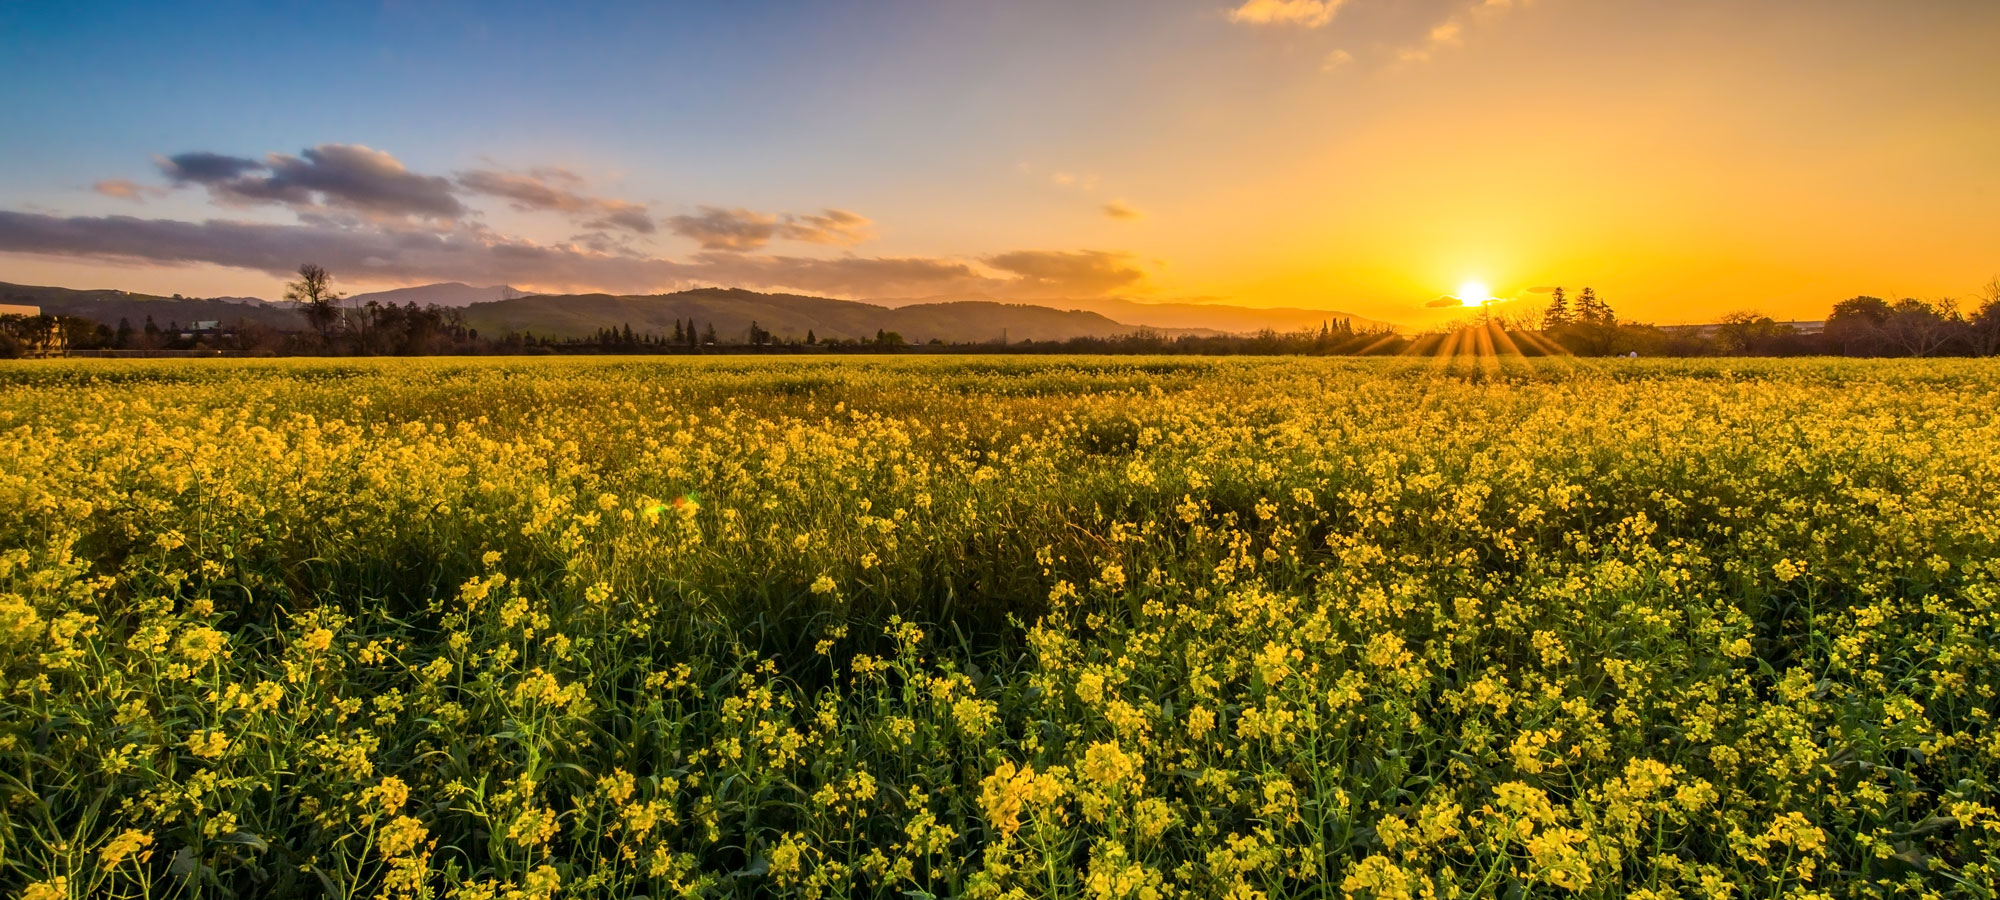 California field of flowers at sunset ppic 30th hero d2